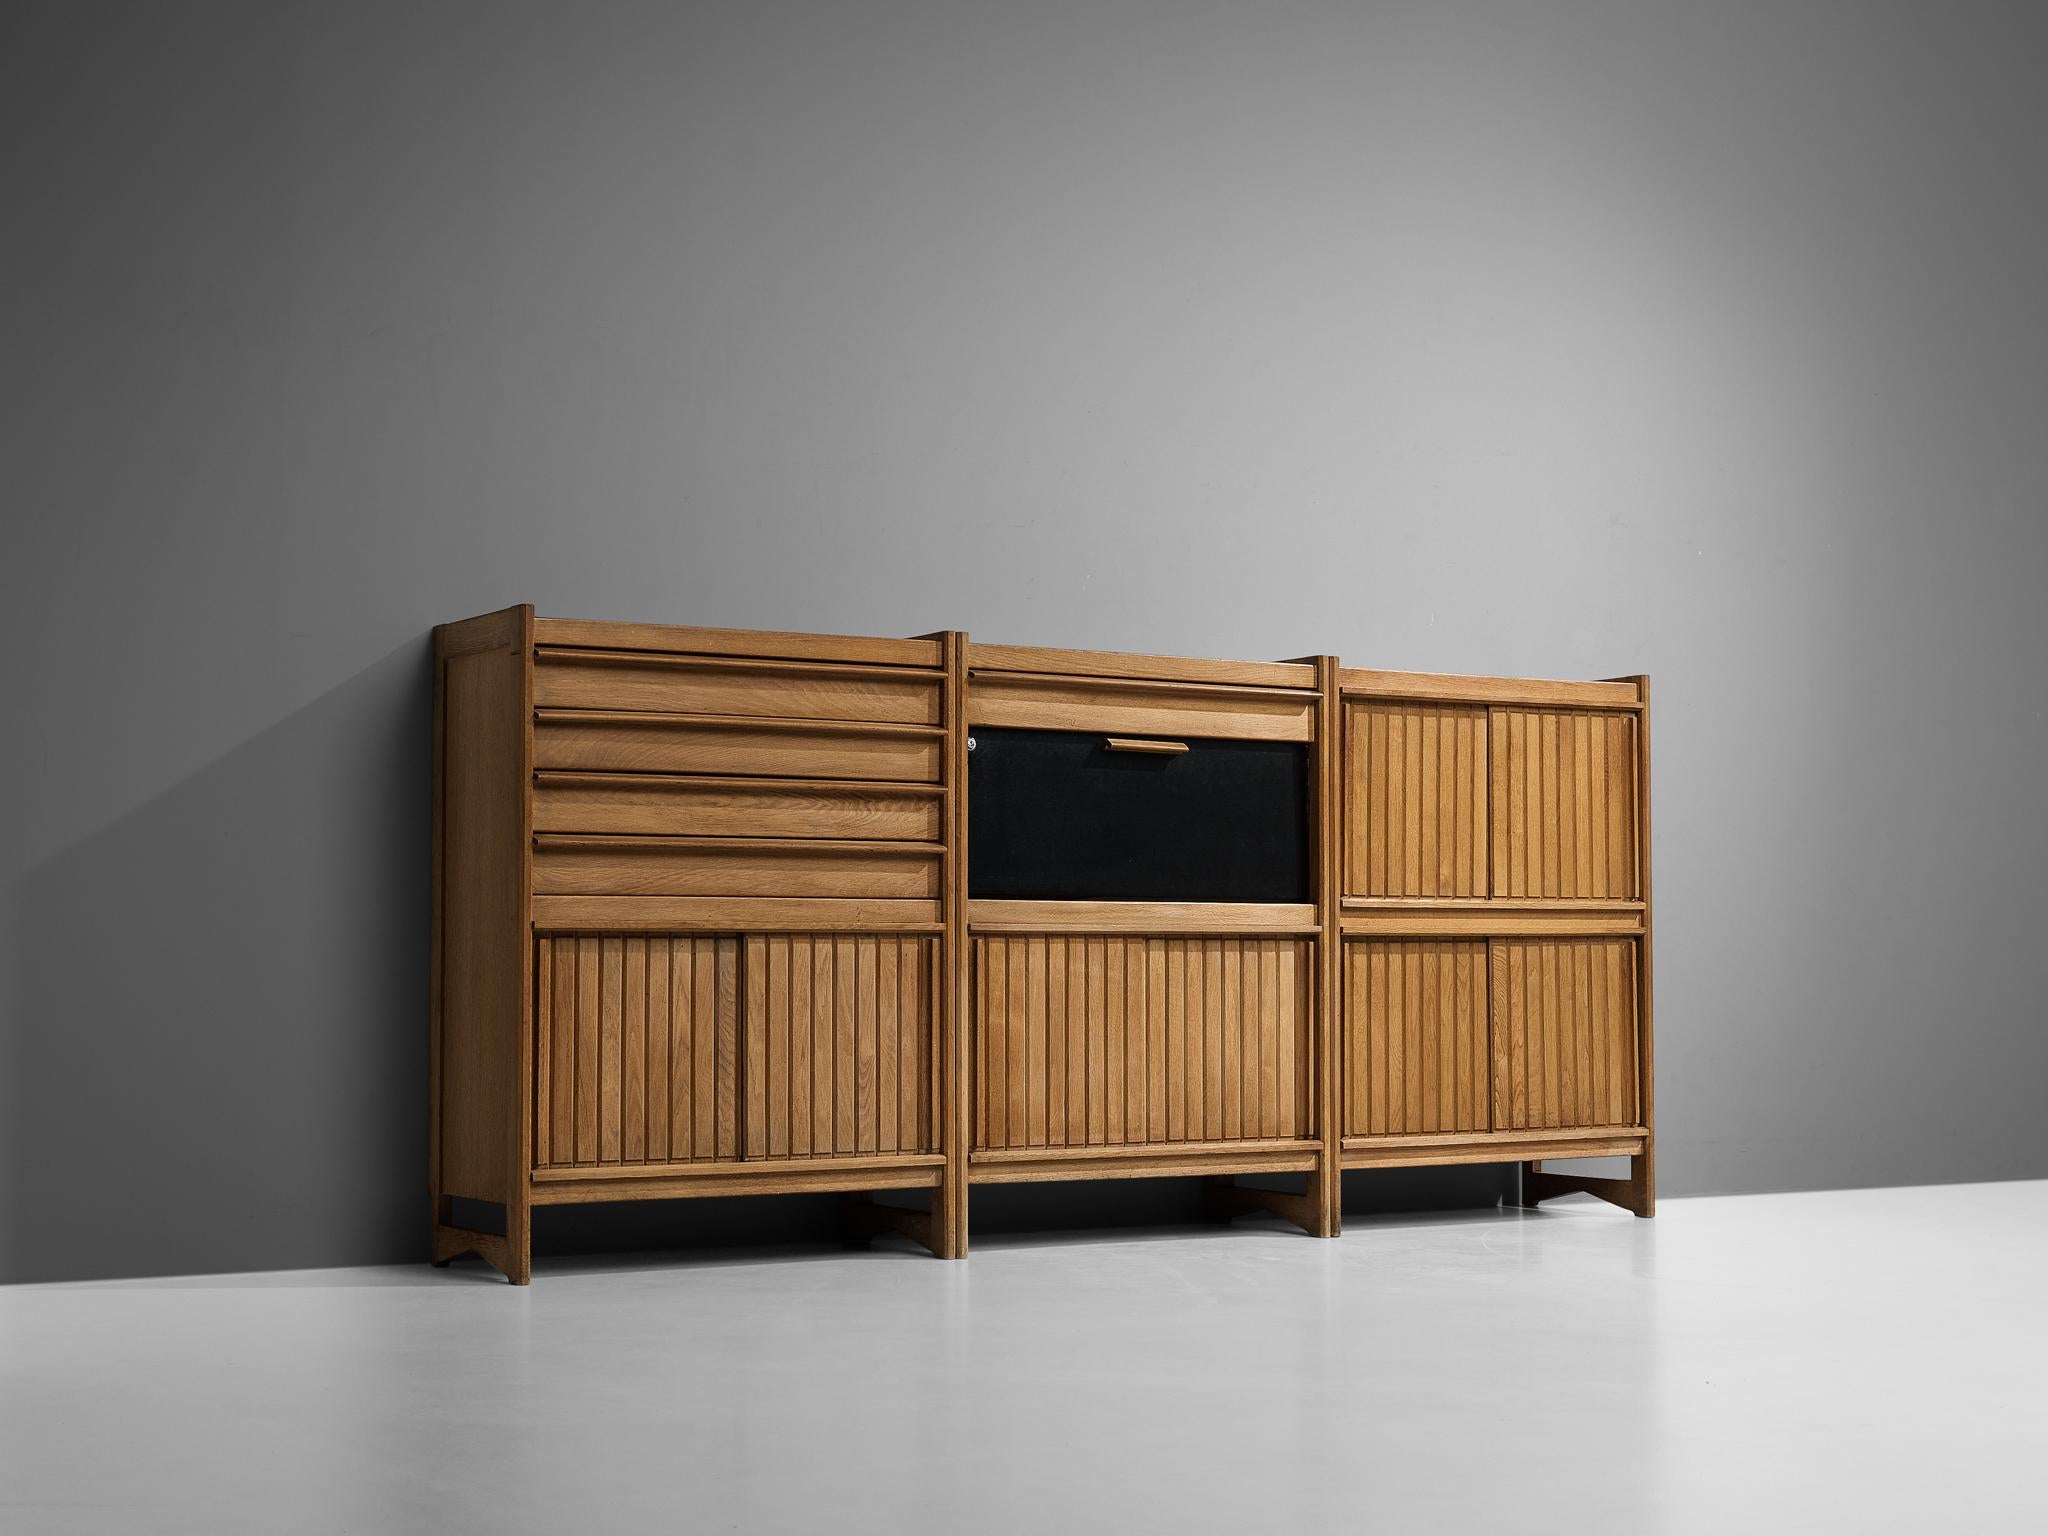 Guillerme et Chambron for Votre Maison, set of three cabinets, oak, leather France, 1960s

This outstanding set of three cabinets is based on a well-designed structure where aesthetics and functionally come hand in hand. The front holds the